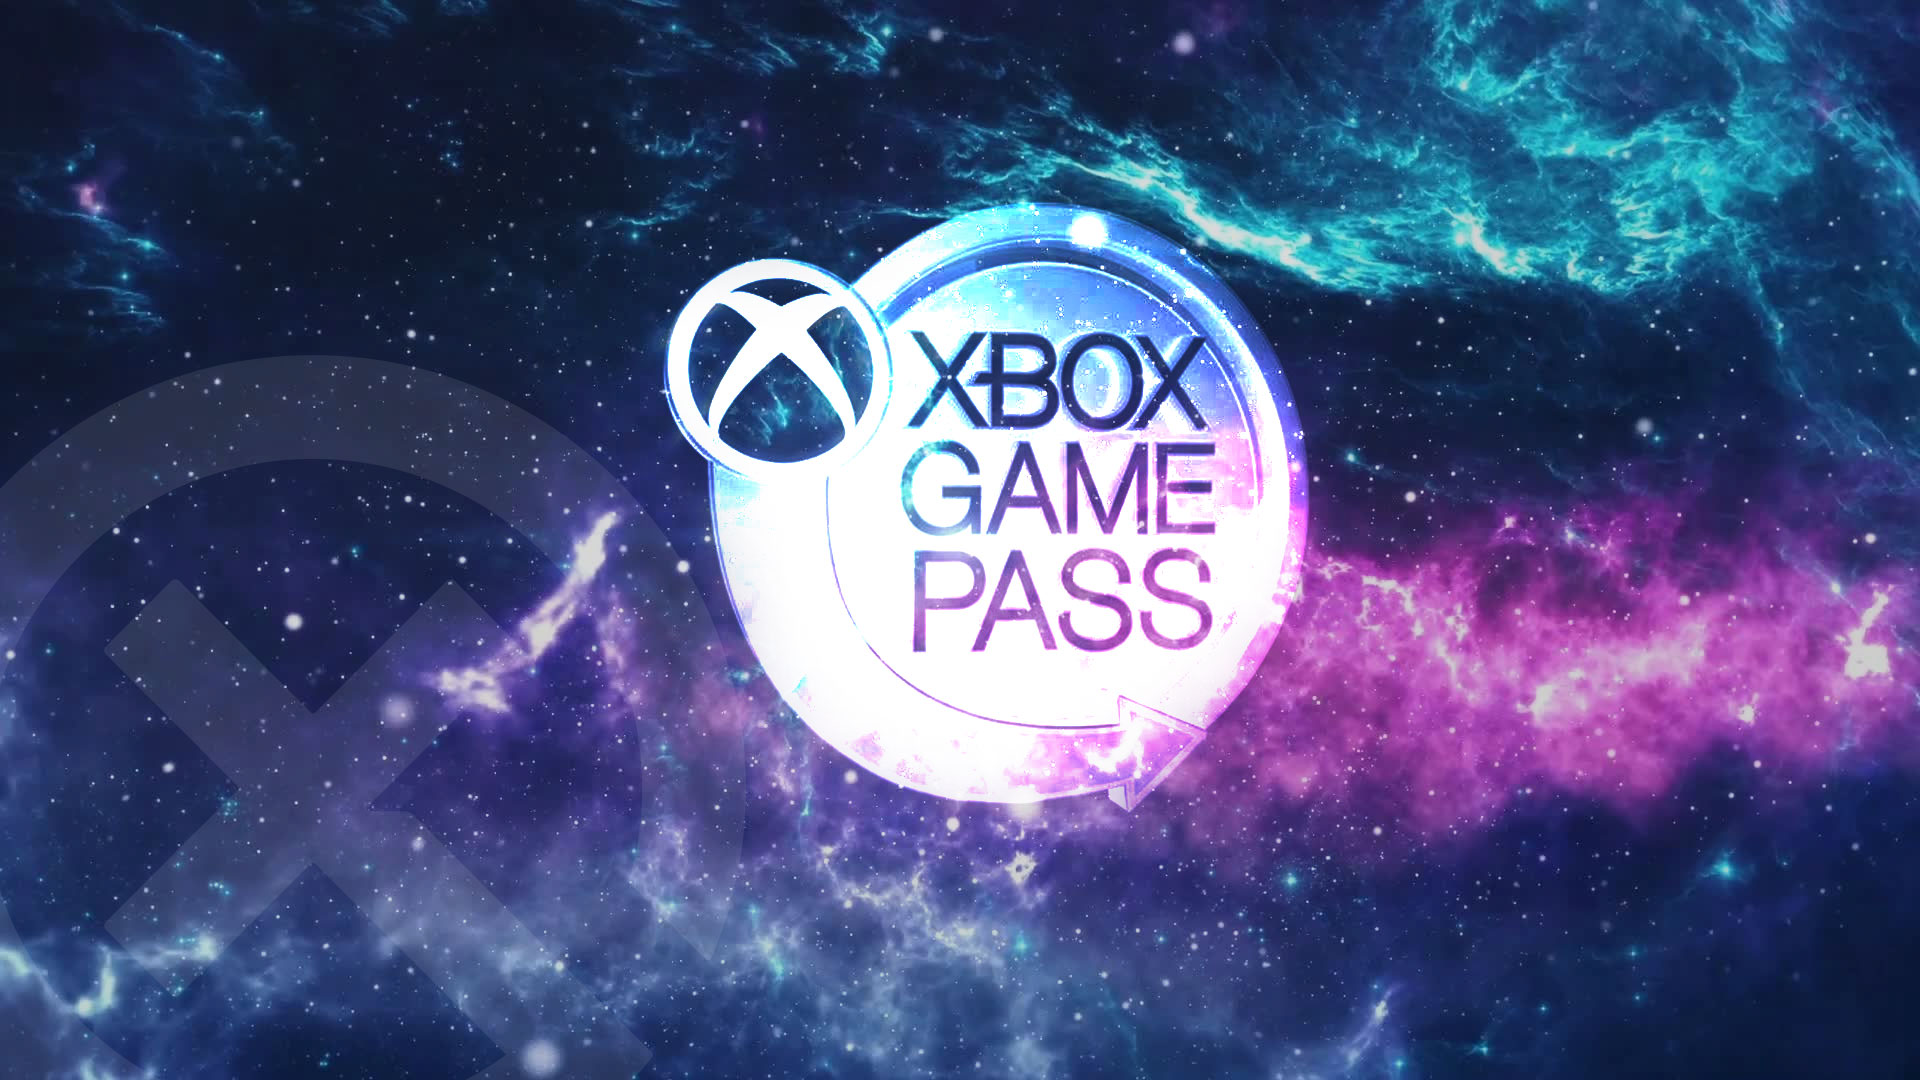 Possibly the most beautiful game in its entire catalog opens today on Xbox Game Pass